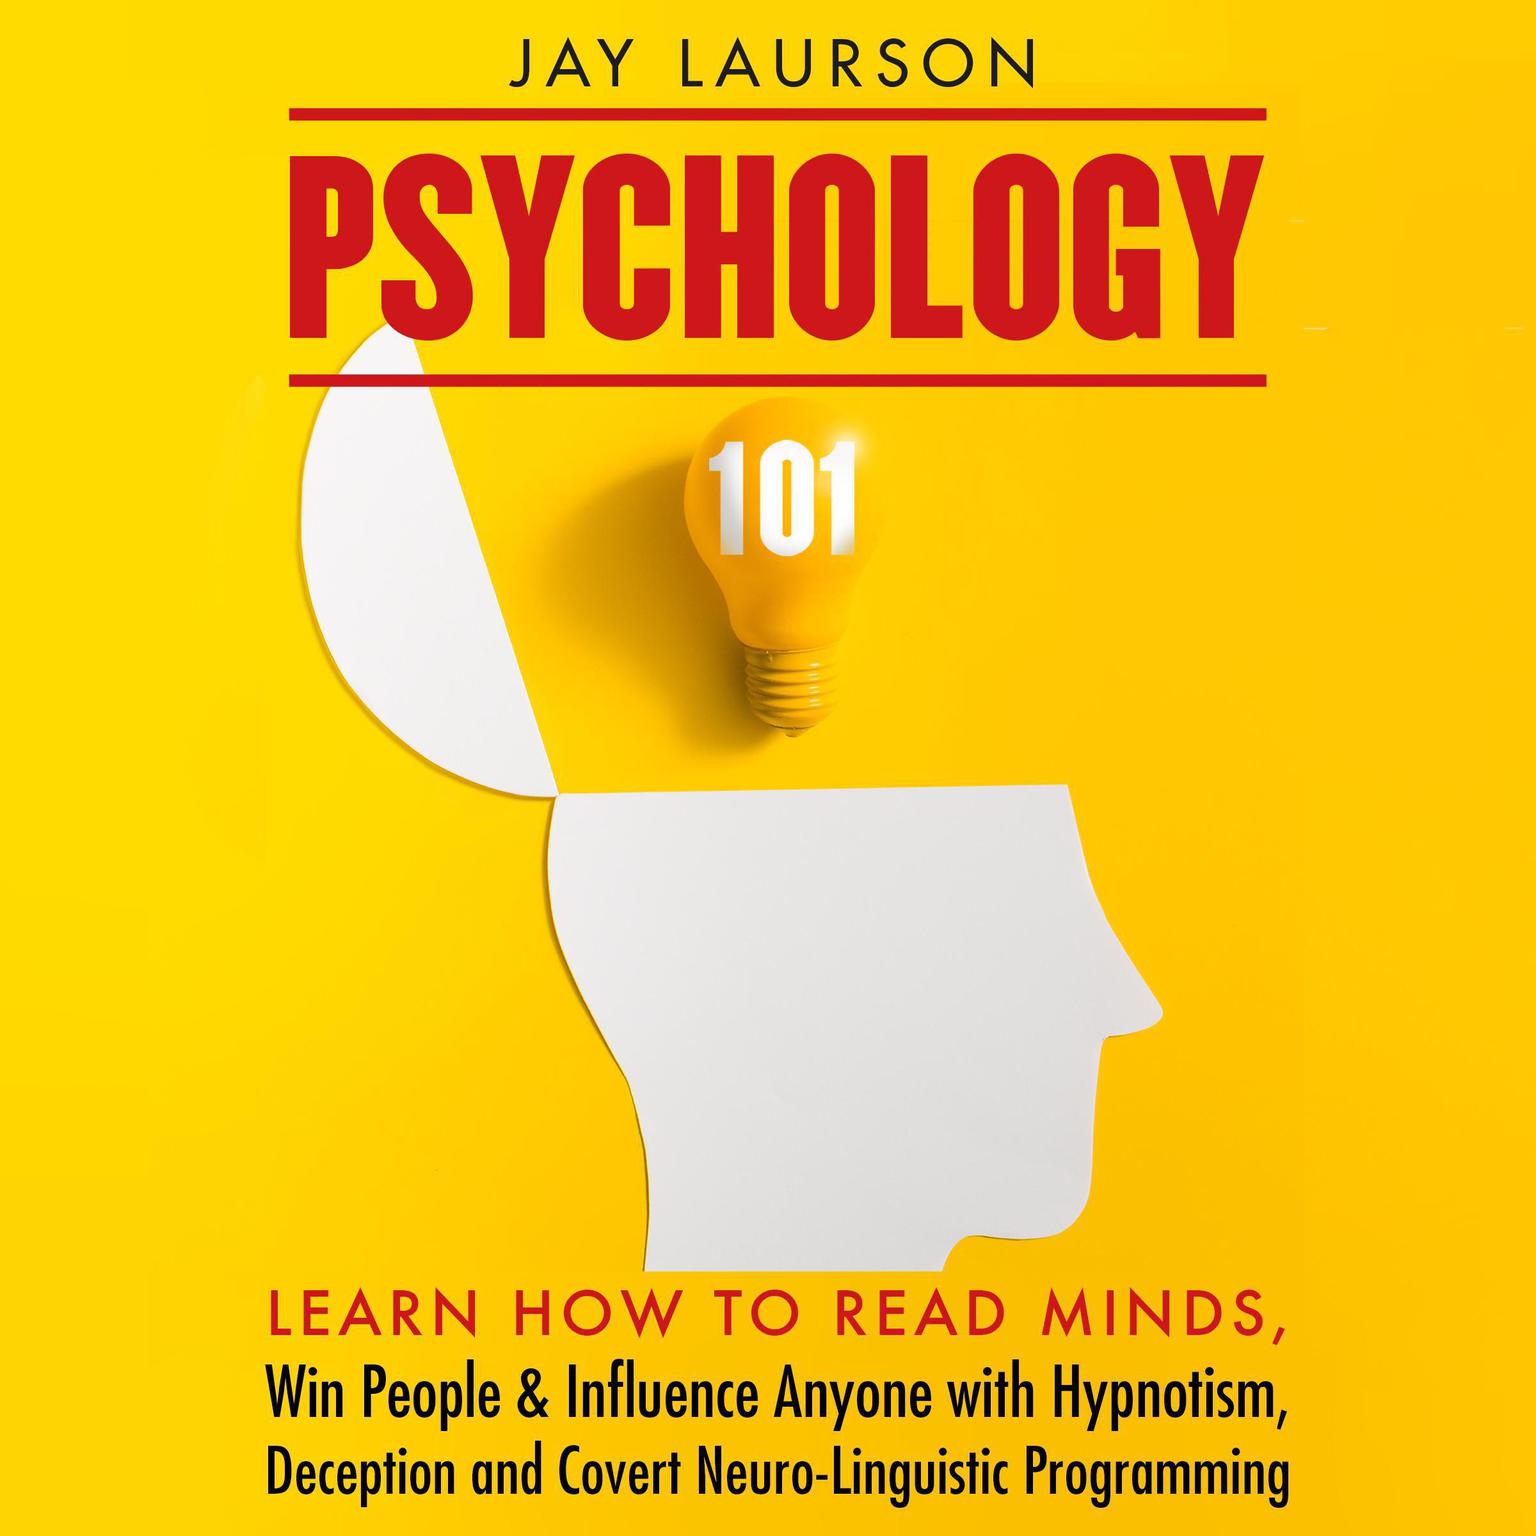 Psychology 101: Learn How to Read Minds, Win People & Influence Anyone with Hypnotism, Deception & Covert Neuro-Linguistic Programming Audiobook, by Jay Laurson